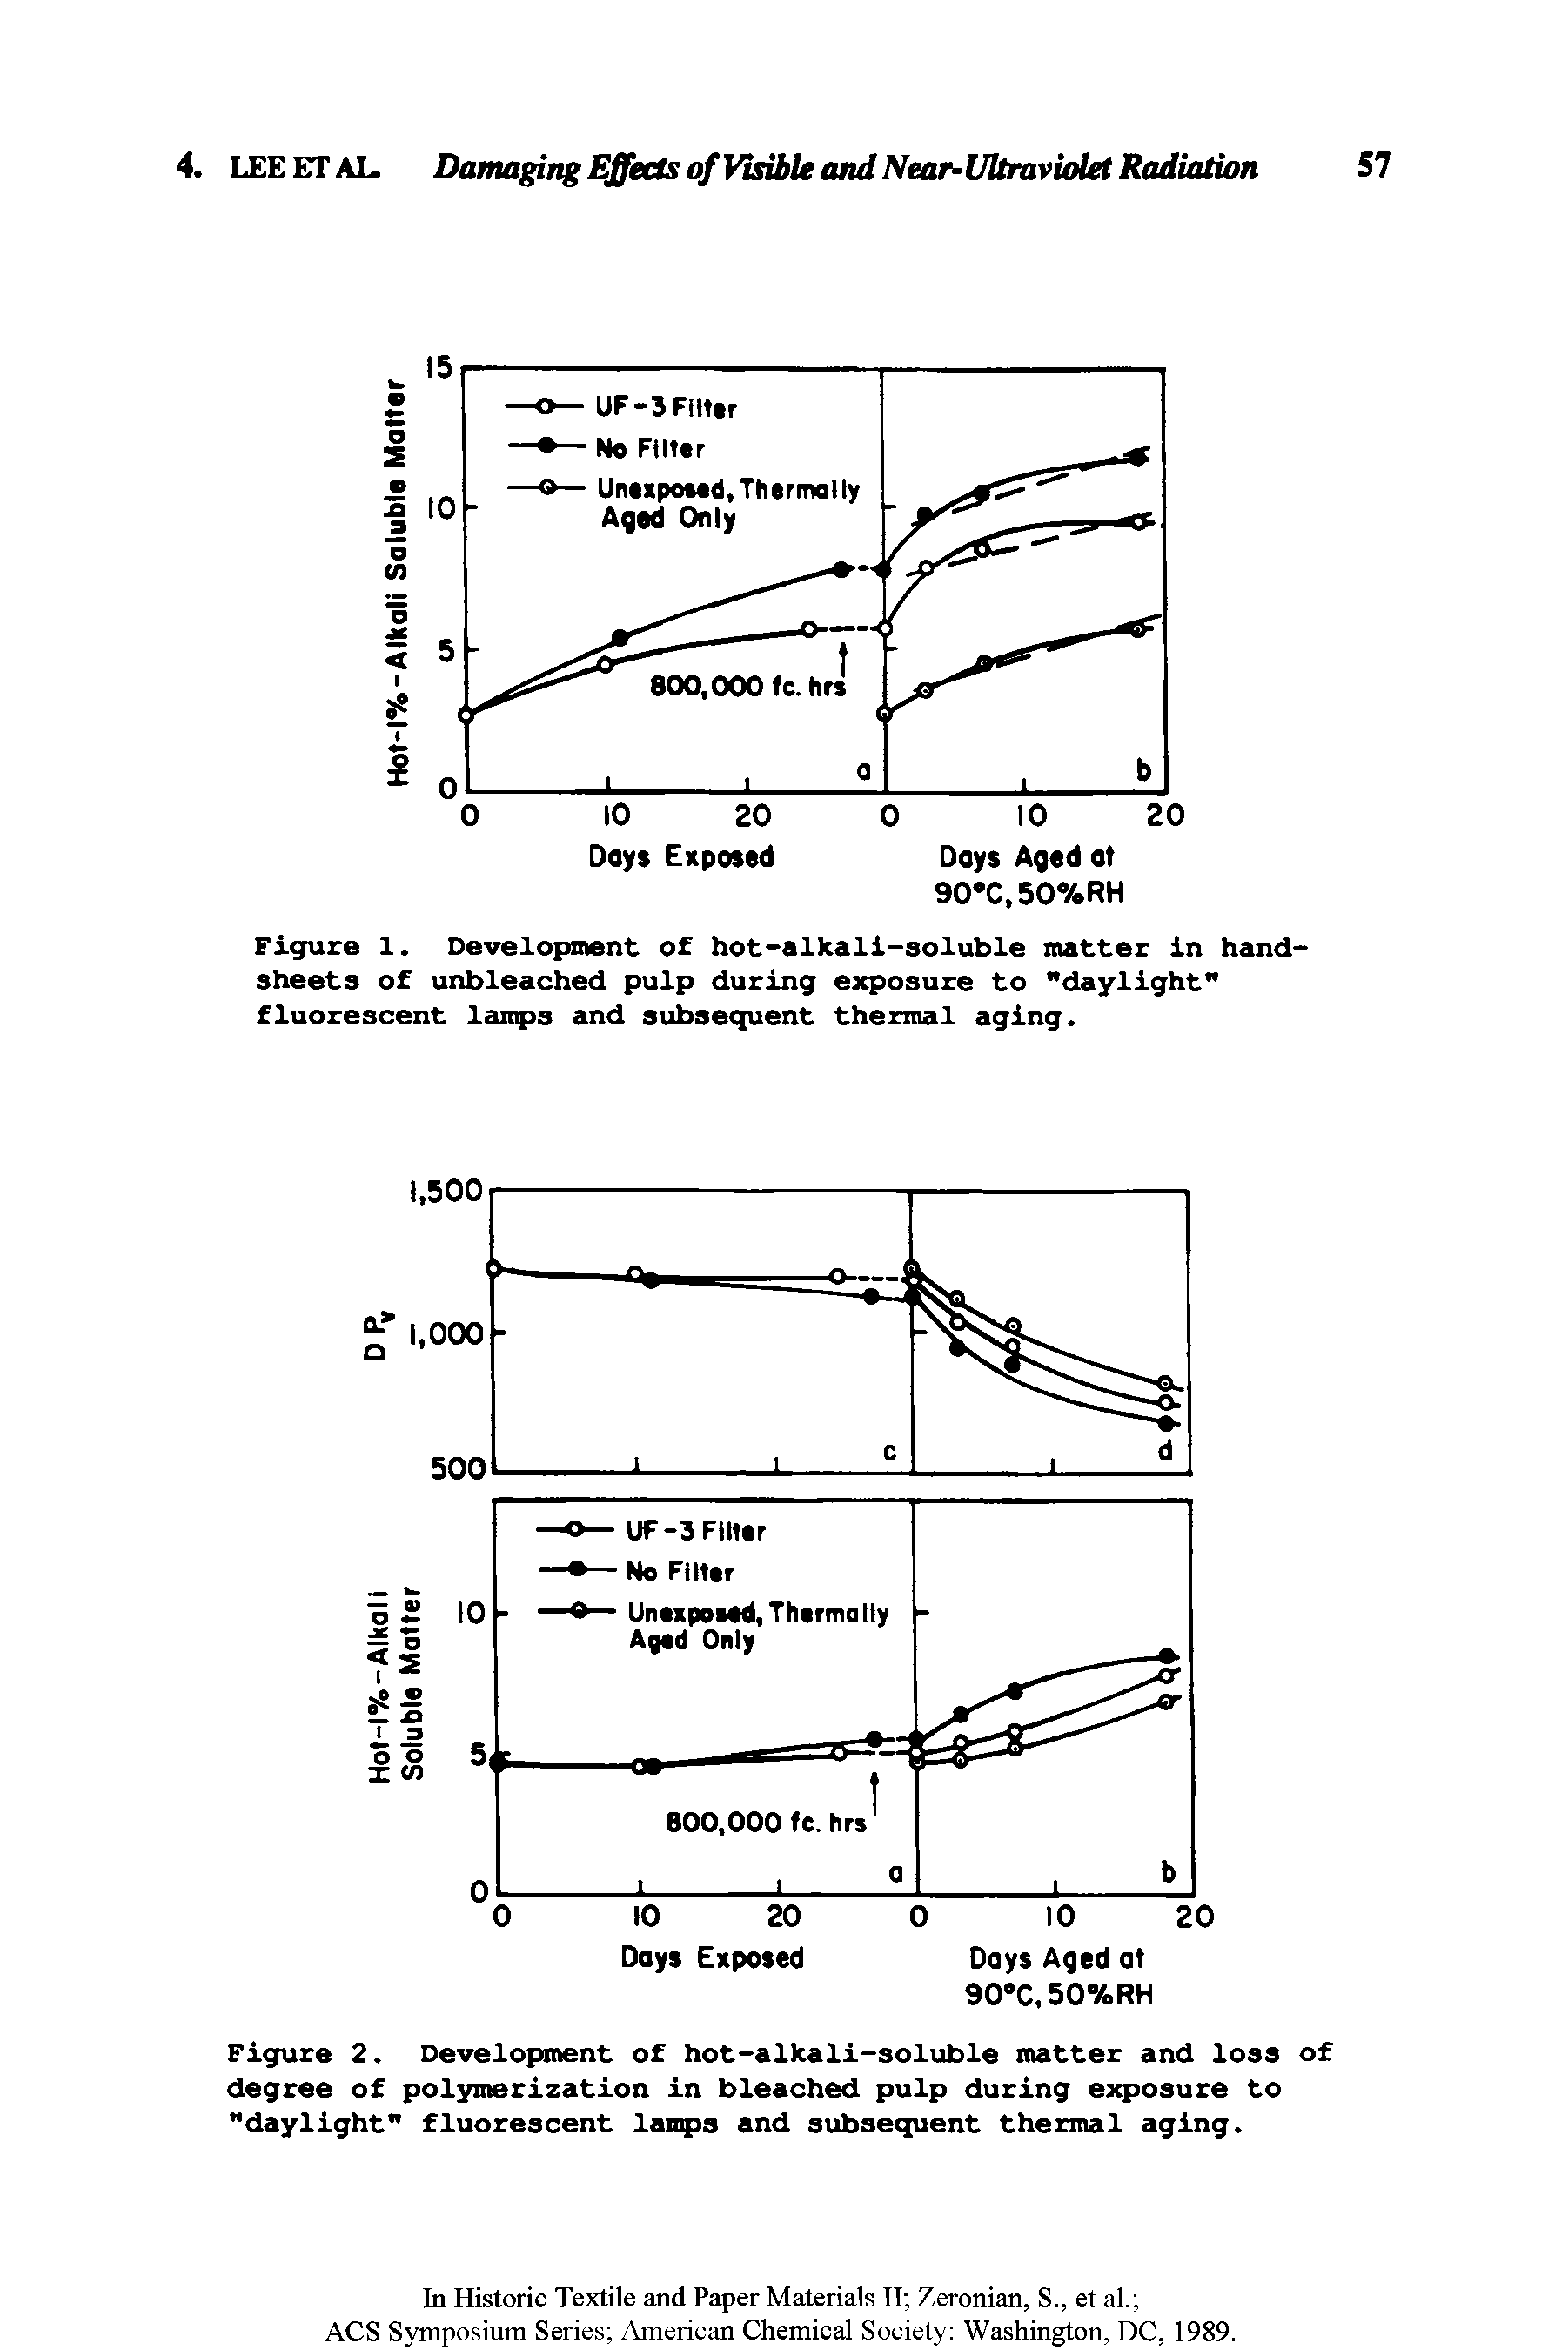 Figure 1. Development of hot-alkali-soluble matter in hand-sheets of unbleached pulp during exposure to "daylight fluorescent lamps and subsequent thermal aging.